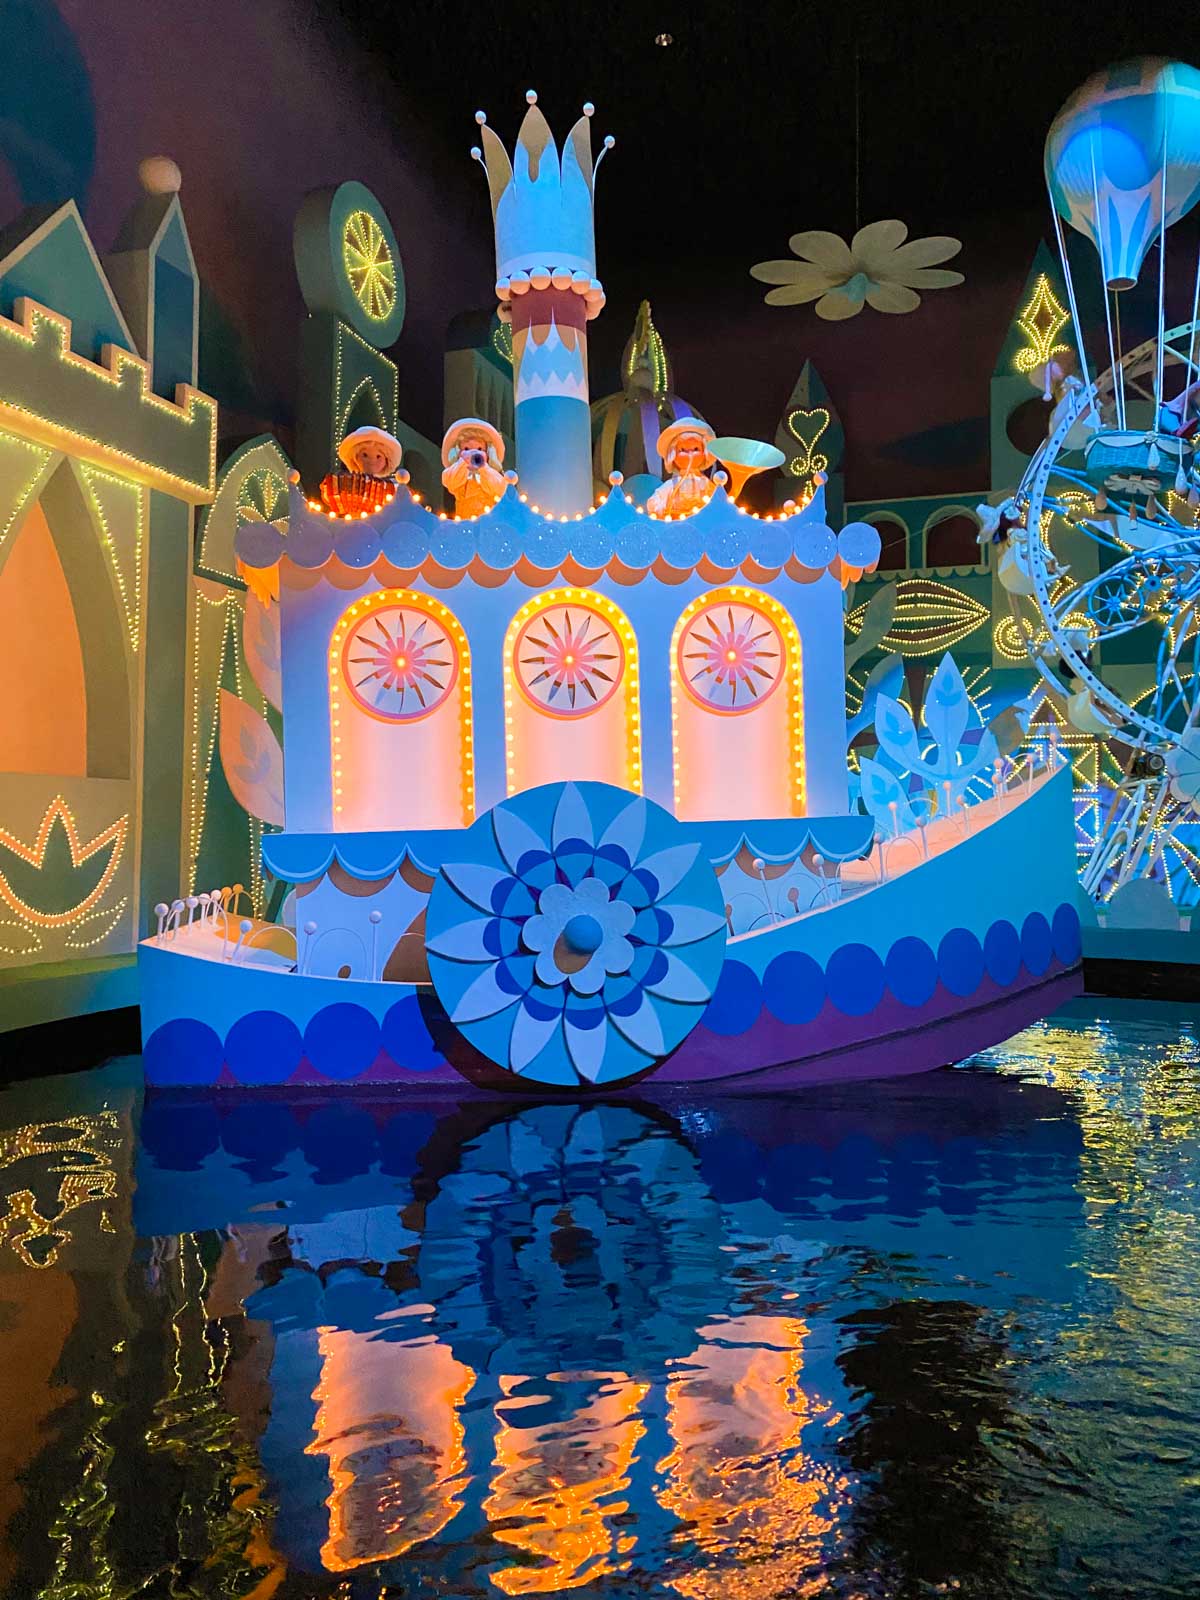 A scene from inside the ride shows a boat all lit up with dancing dolls on top.